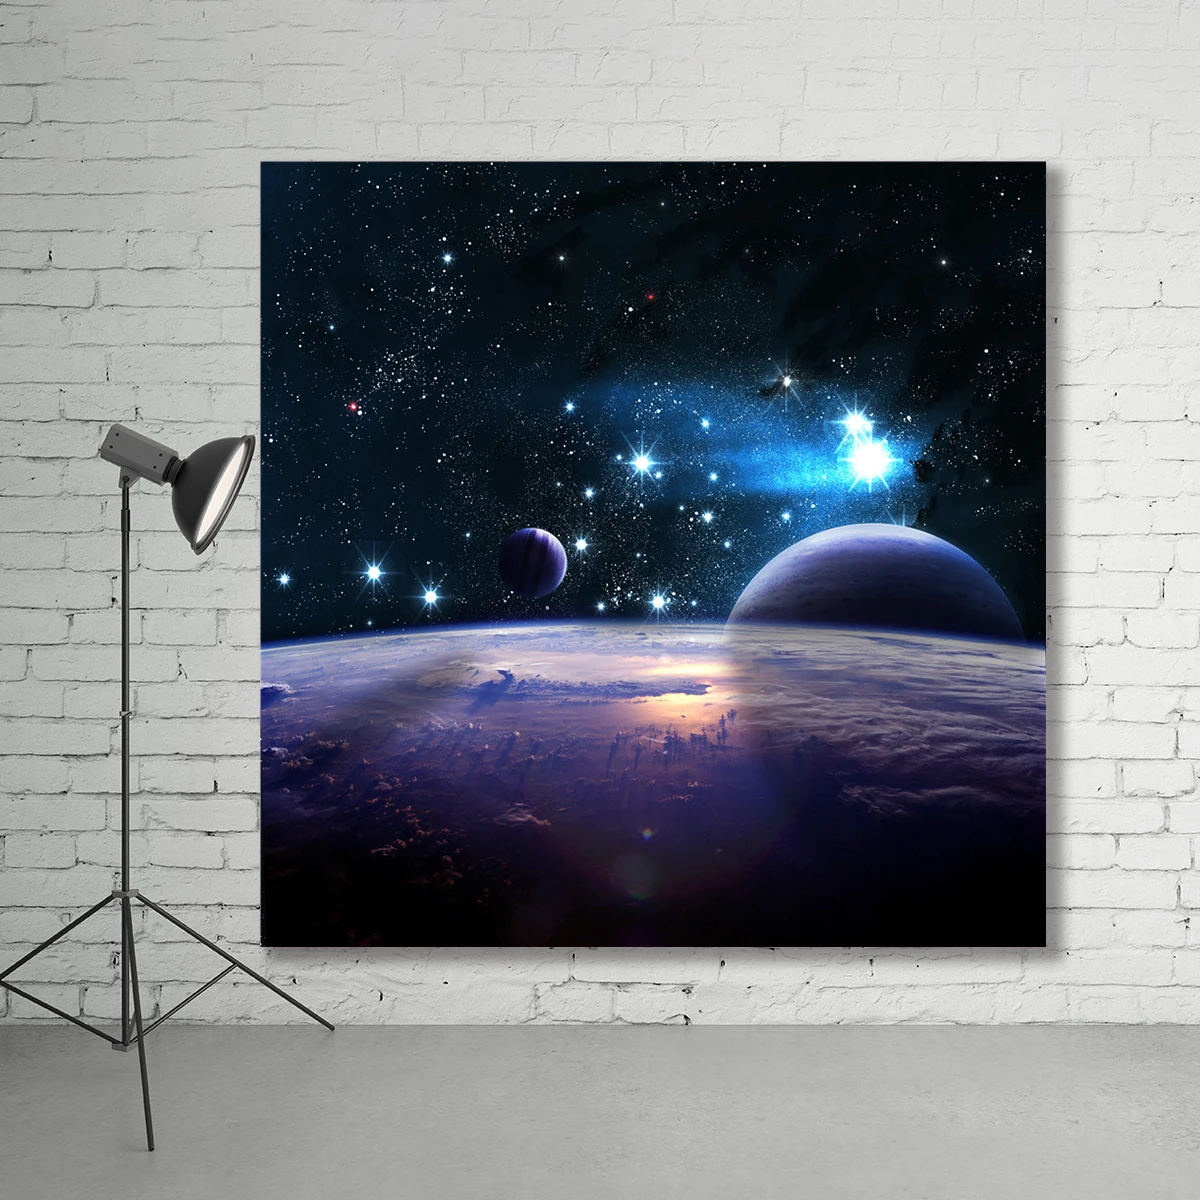 

Blue Earth Planet Universe Space Starry Sky Party Decoration Photophone Backdrop Photo Studio Props Photography Background Vinyl